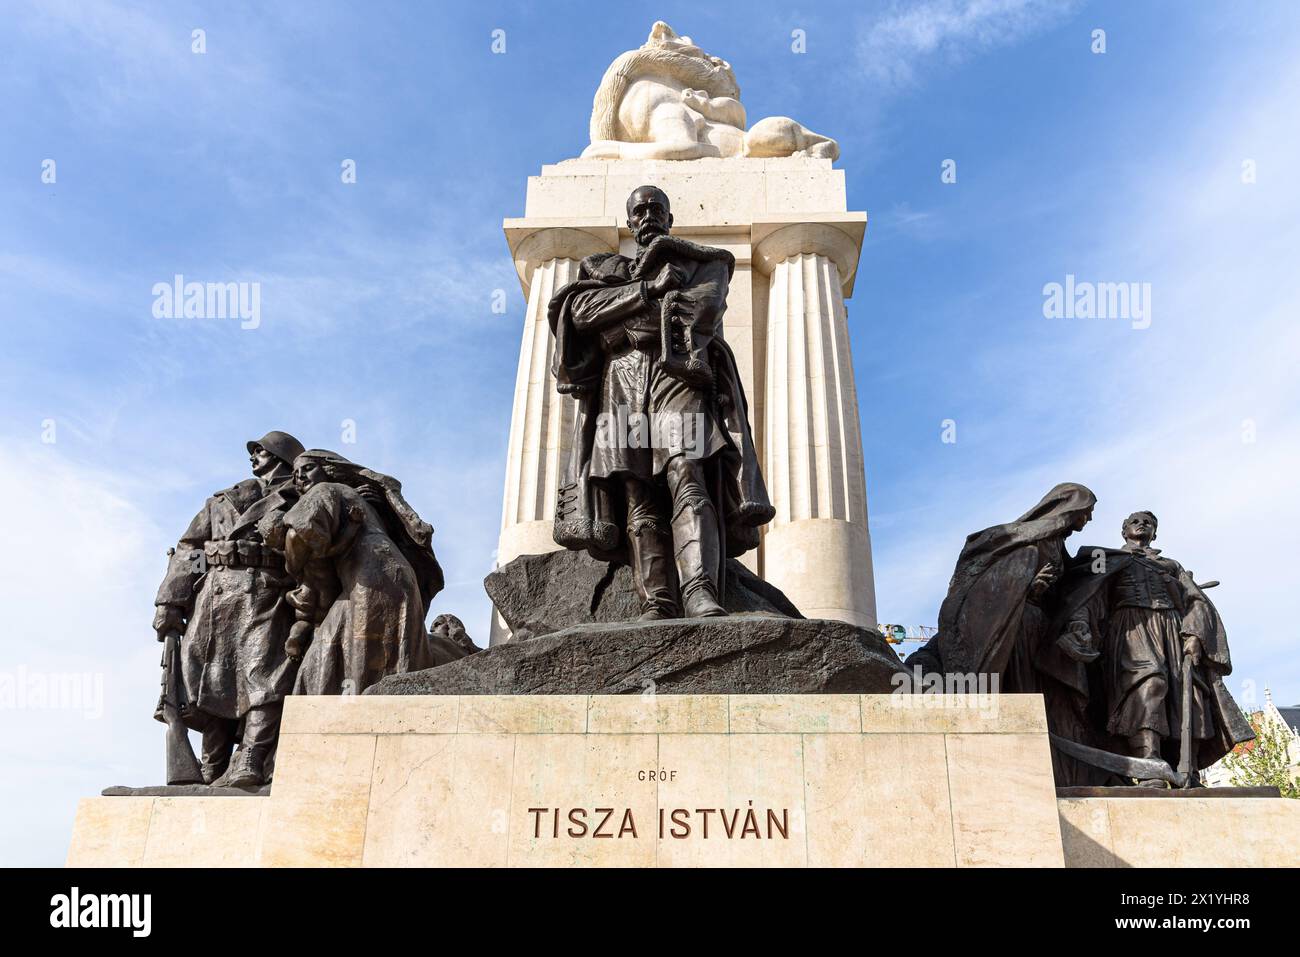 The Istvan Tisza statue in Budapest at Kossuth ter by parliament Stock Photo